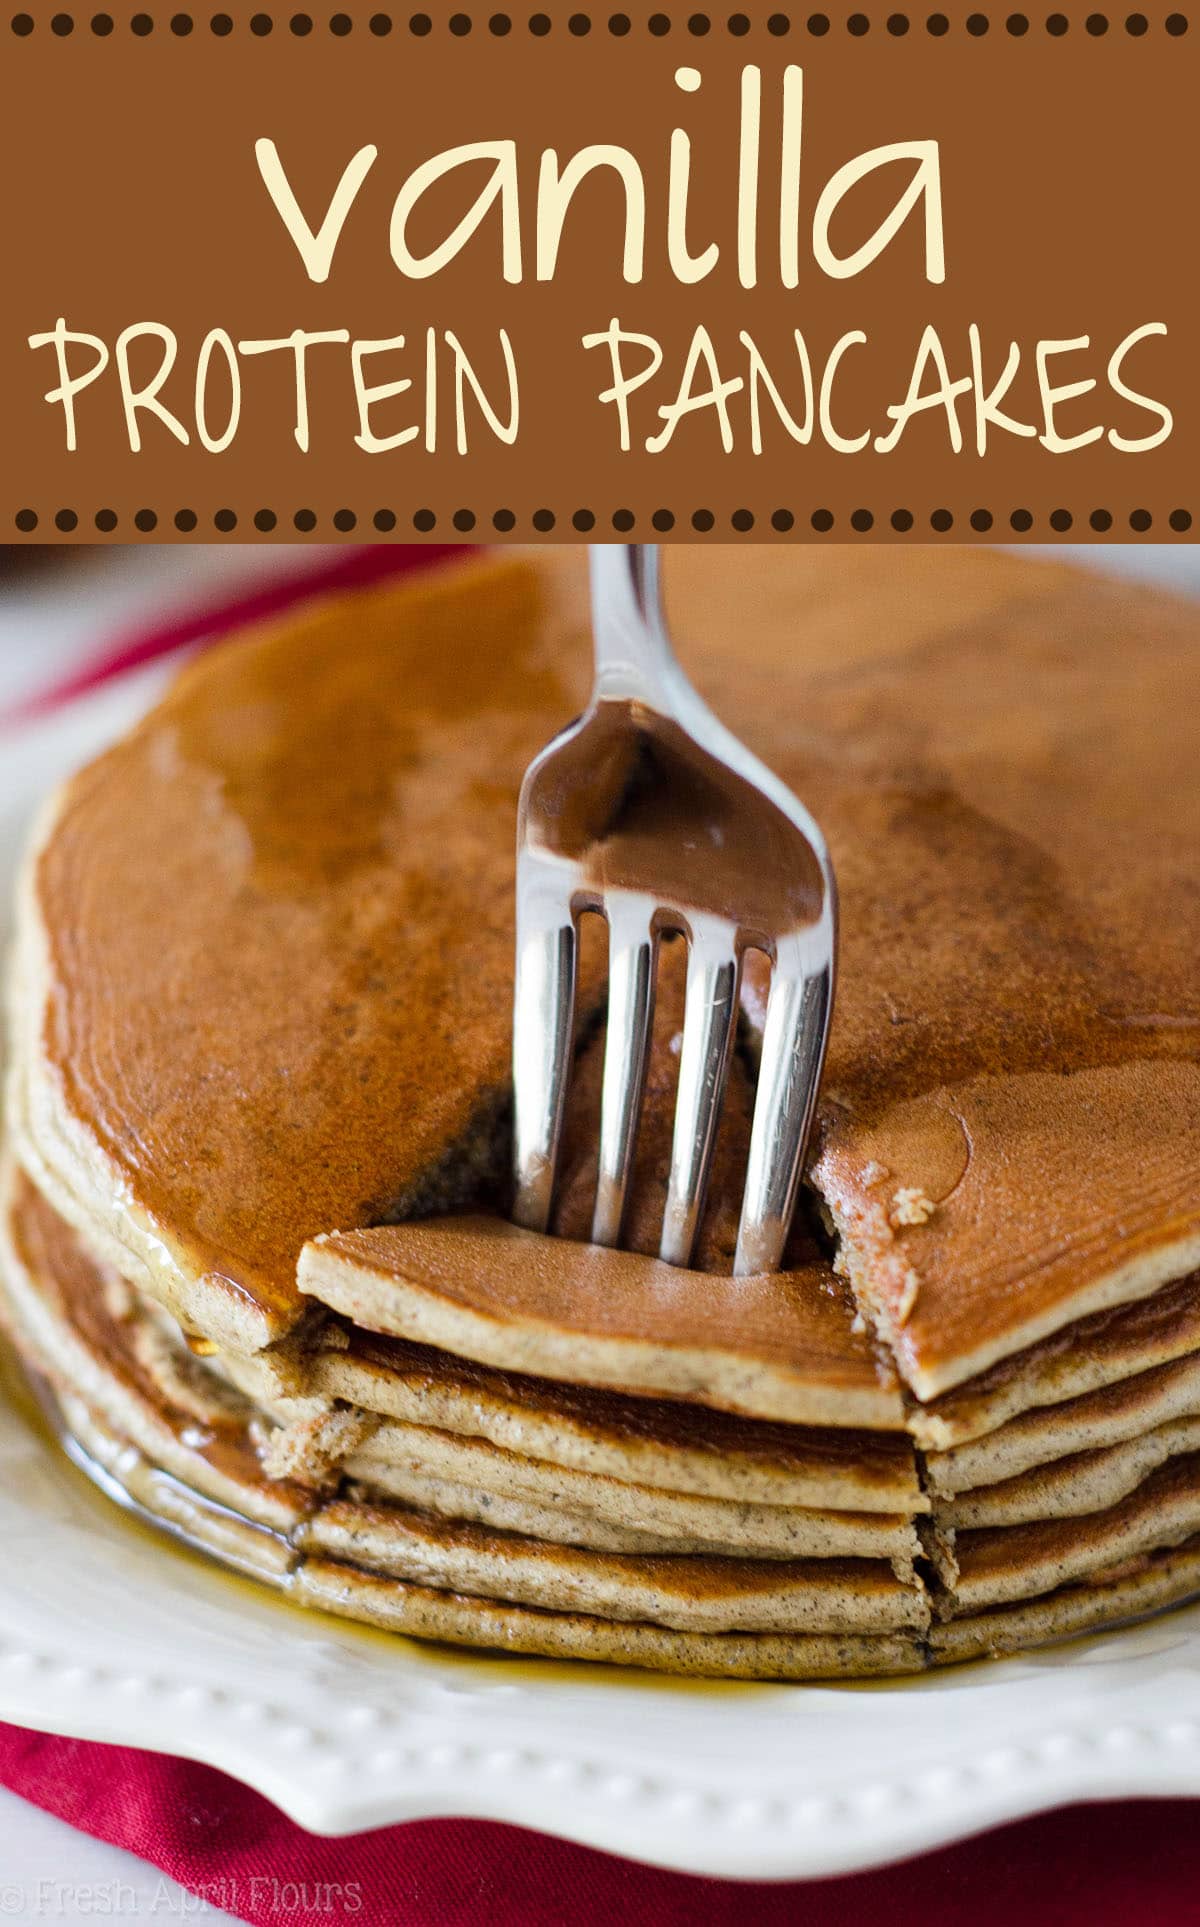 Vanilla Protein Pancakes: Hearty, gluten free, and protein packed pancakes come together in a snap to make breakfast even better. Makes great leftovers! via @frshaprilflours